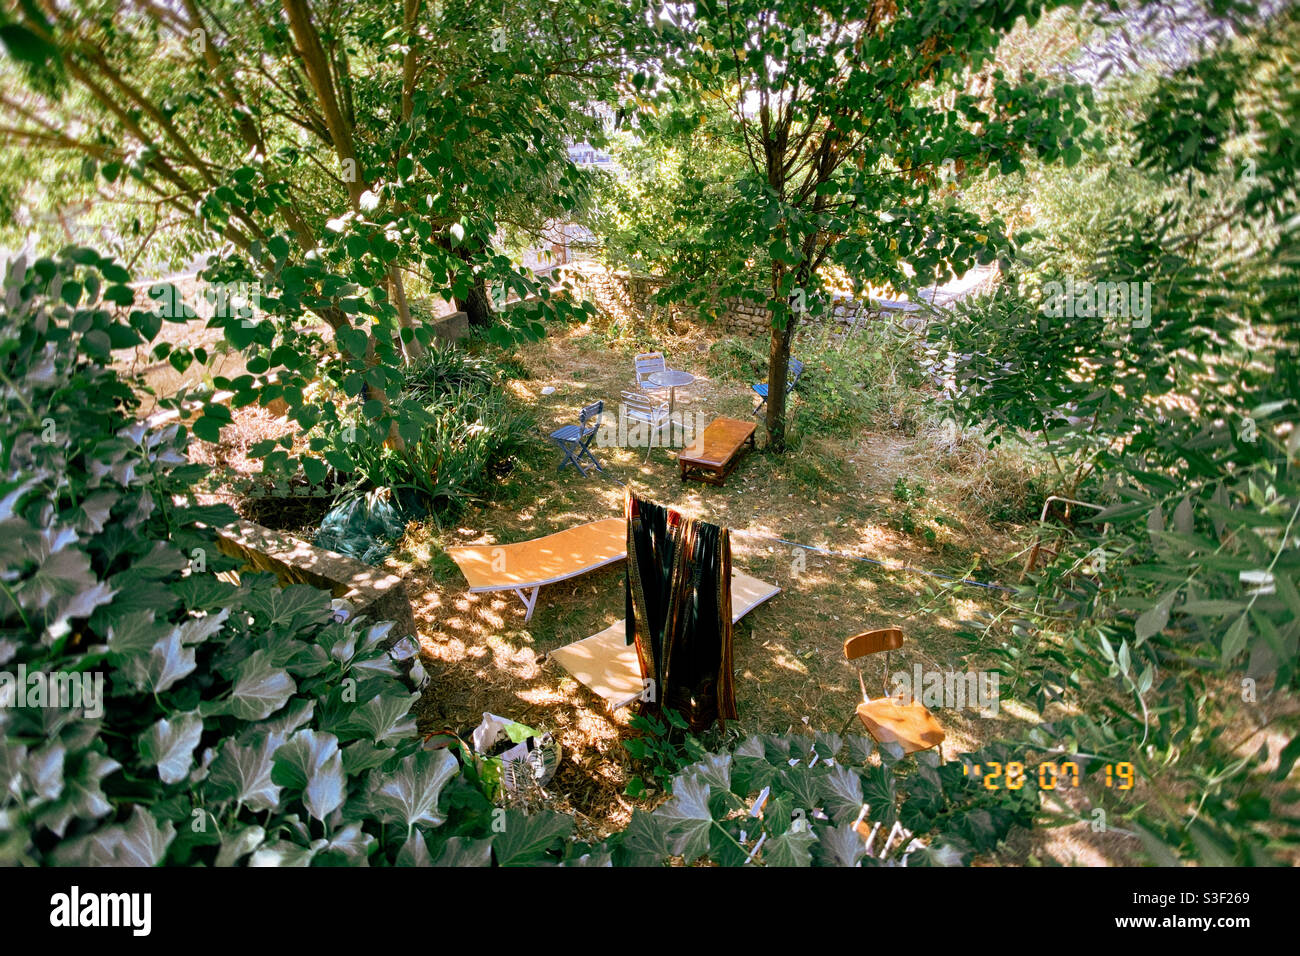 Sunny forest garden or backyard with chairs Stock Photo